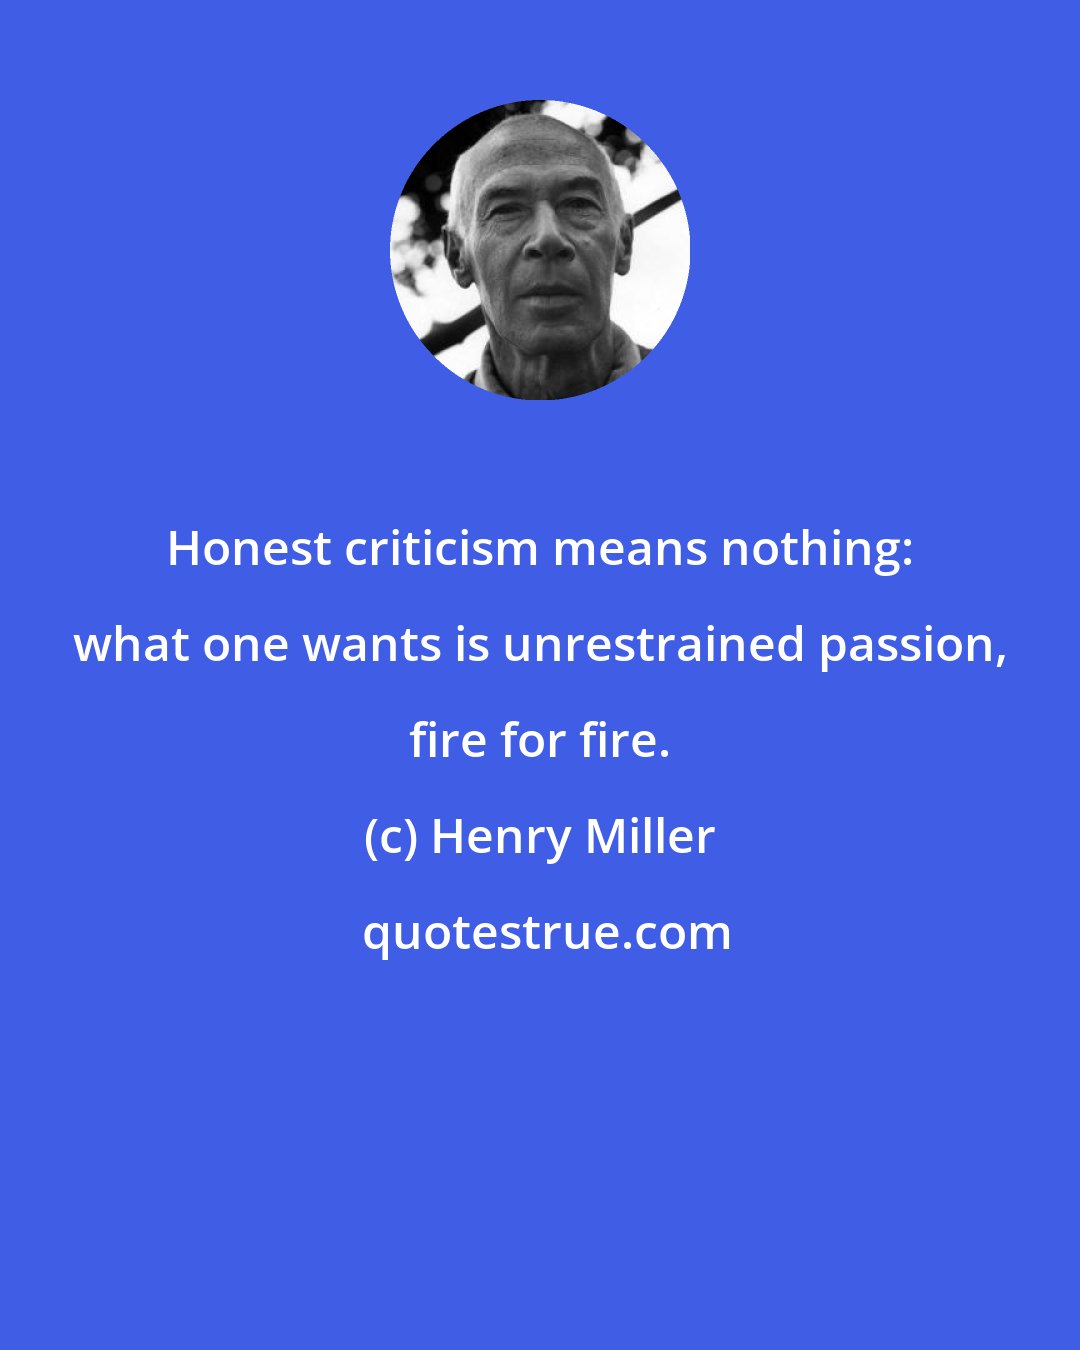 Henry Miller: Honest criticism means nothing: what one wants is unrestrained passion, fire for fire.